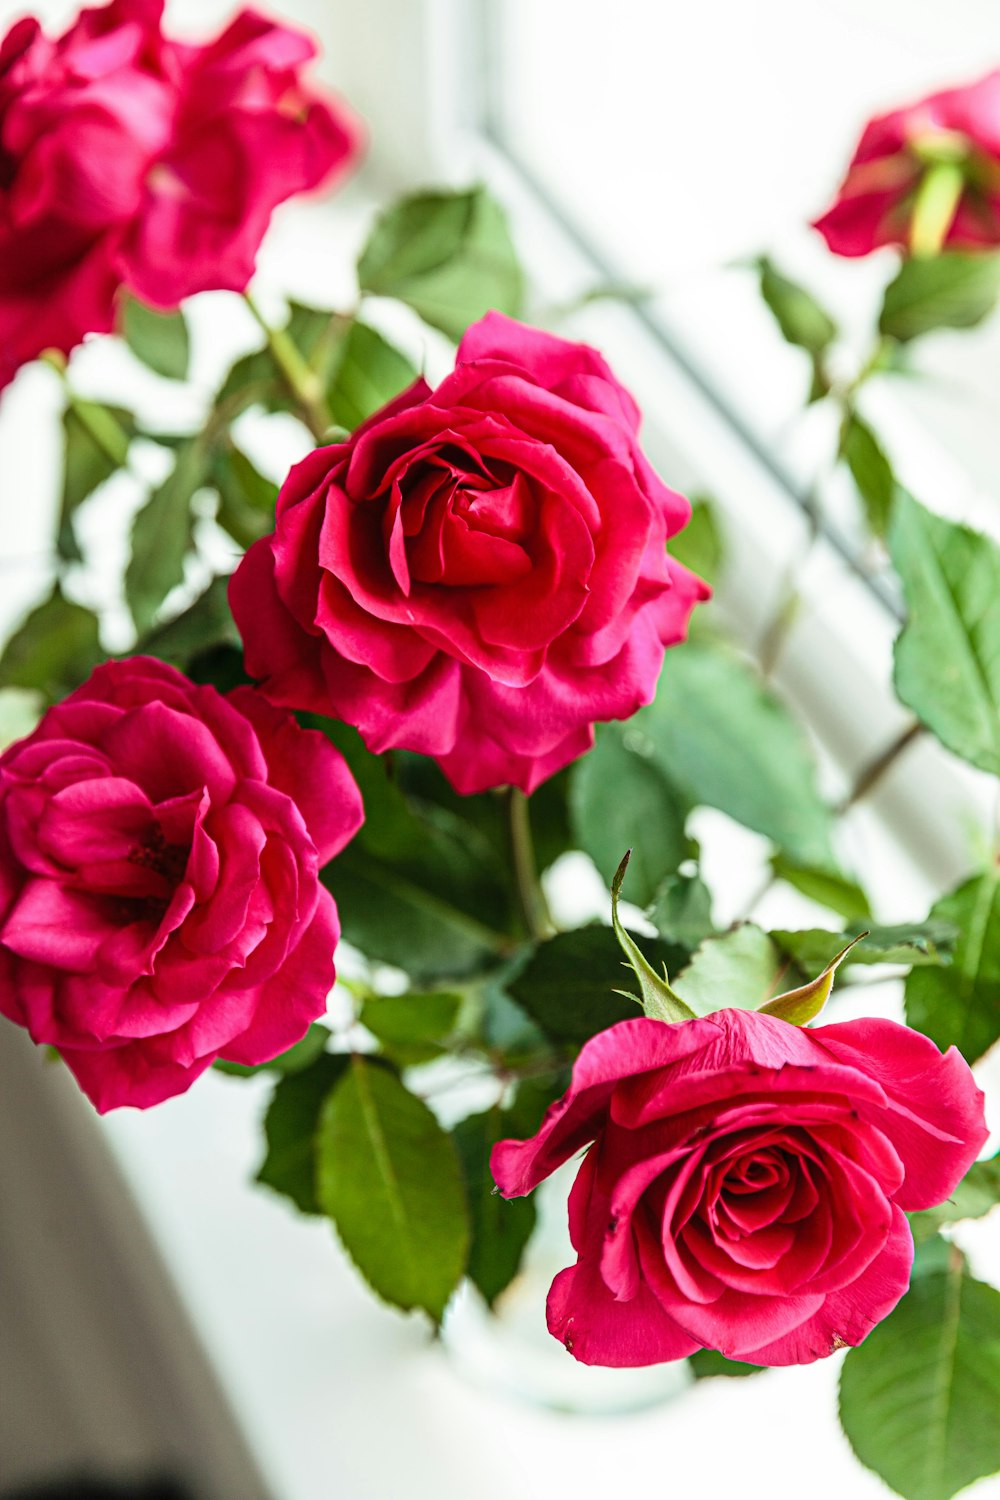 Rose Pictures HD | Download Free Images & Stock Photos ...